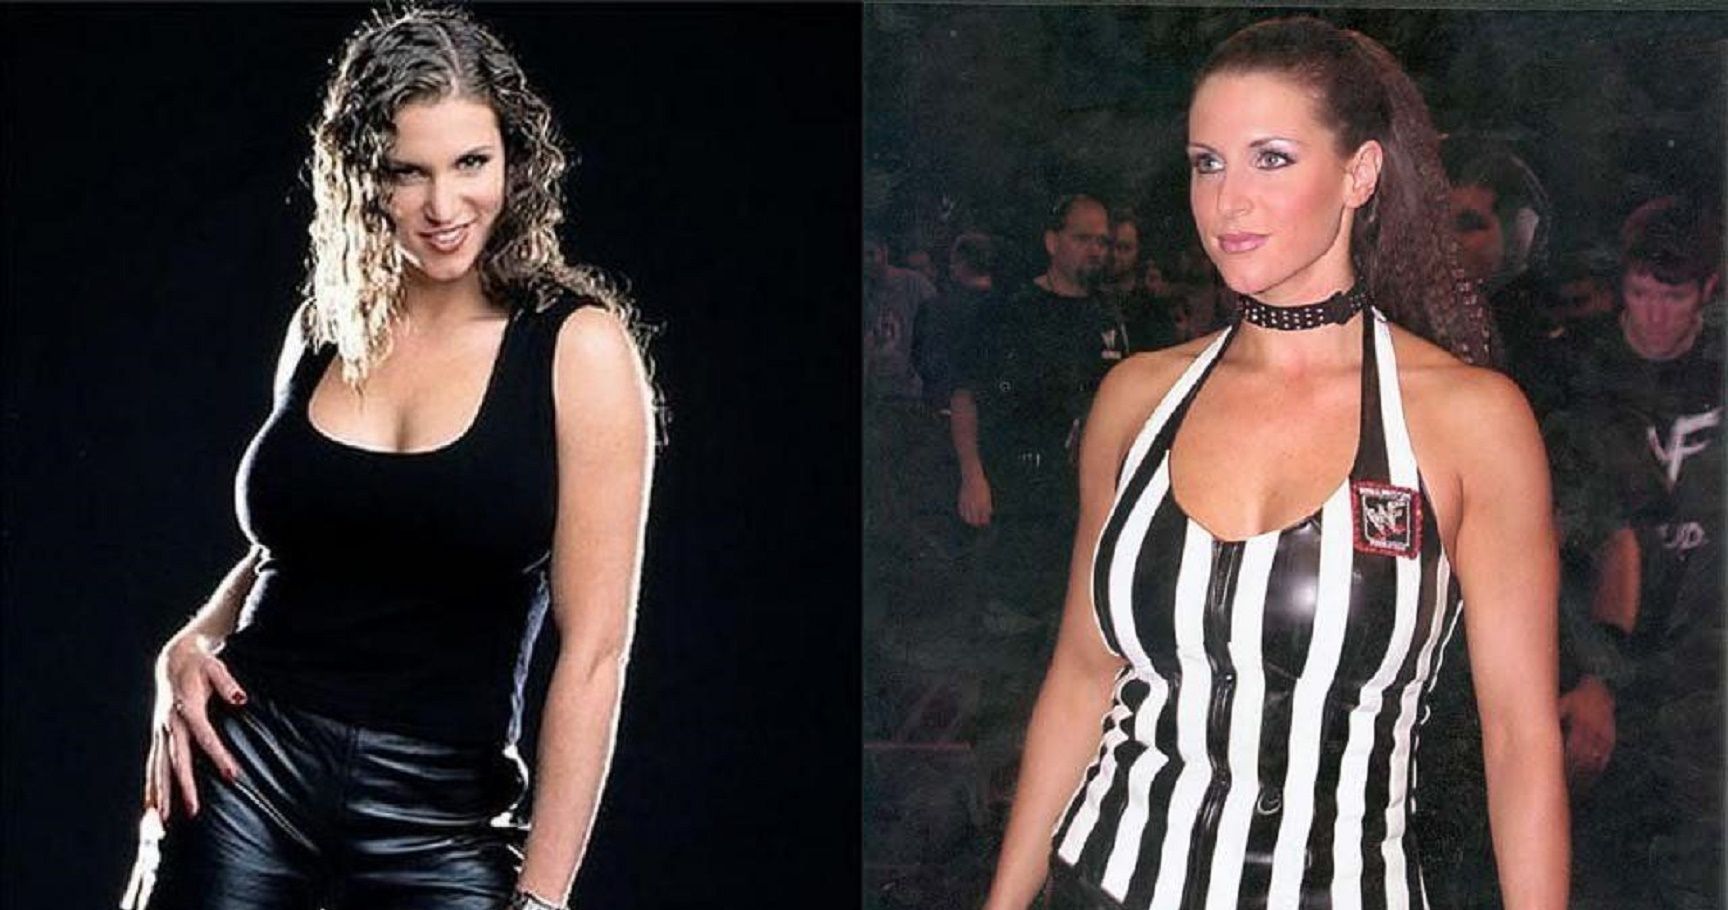 Stefani Wwe Xxx - Top 20 Hot Pictures of Stephanie McMahon You NEED to See